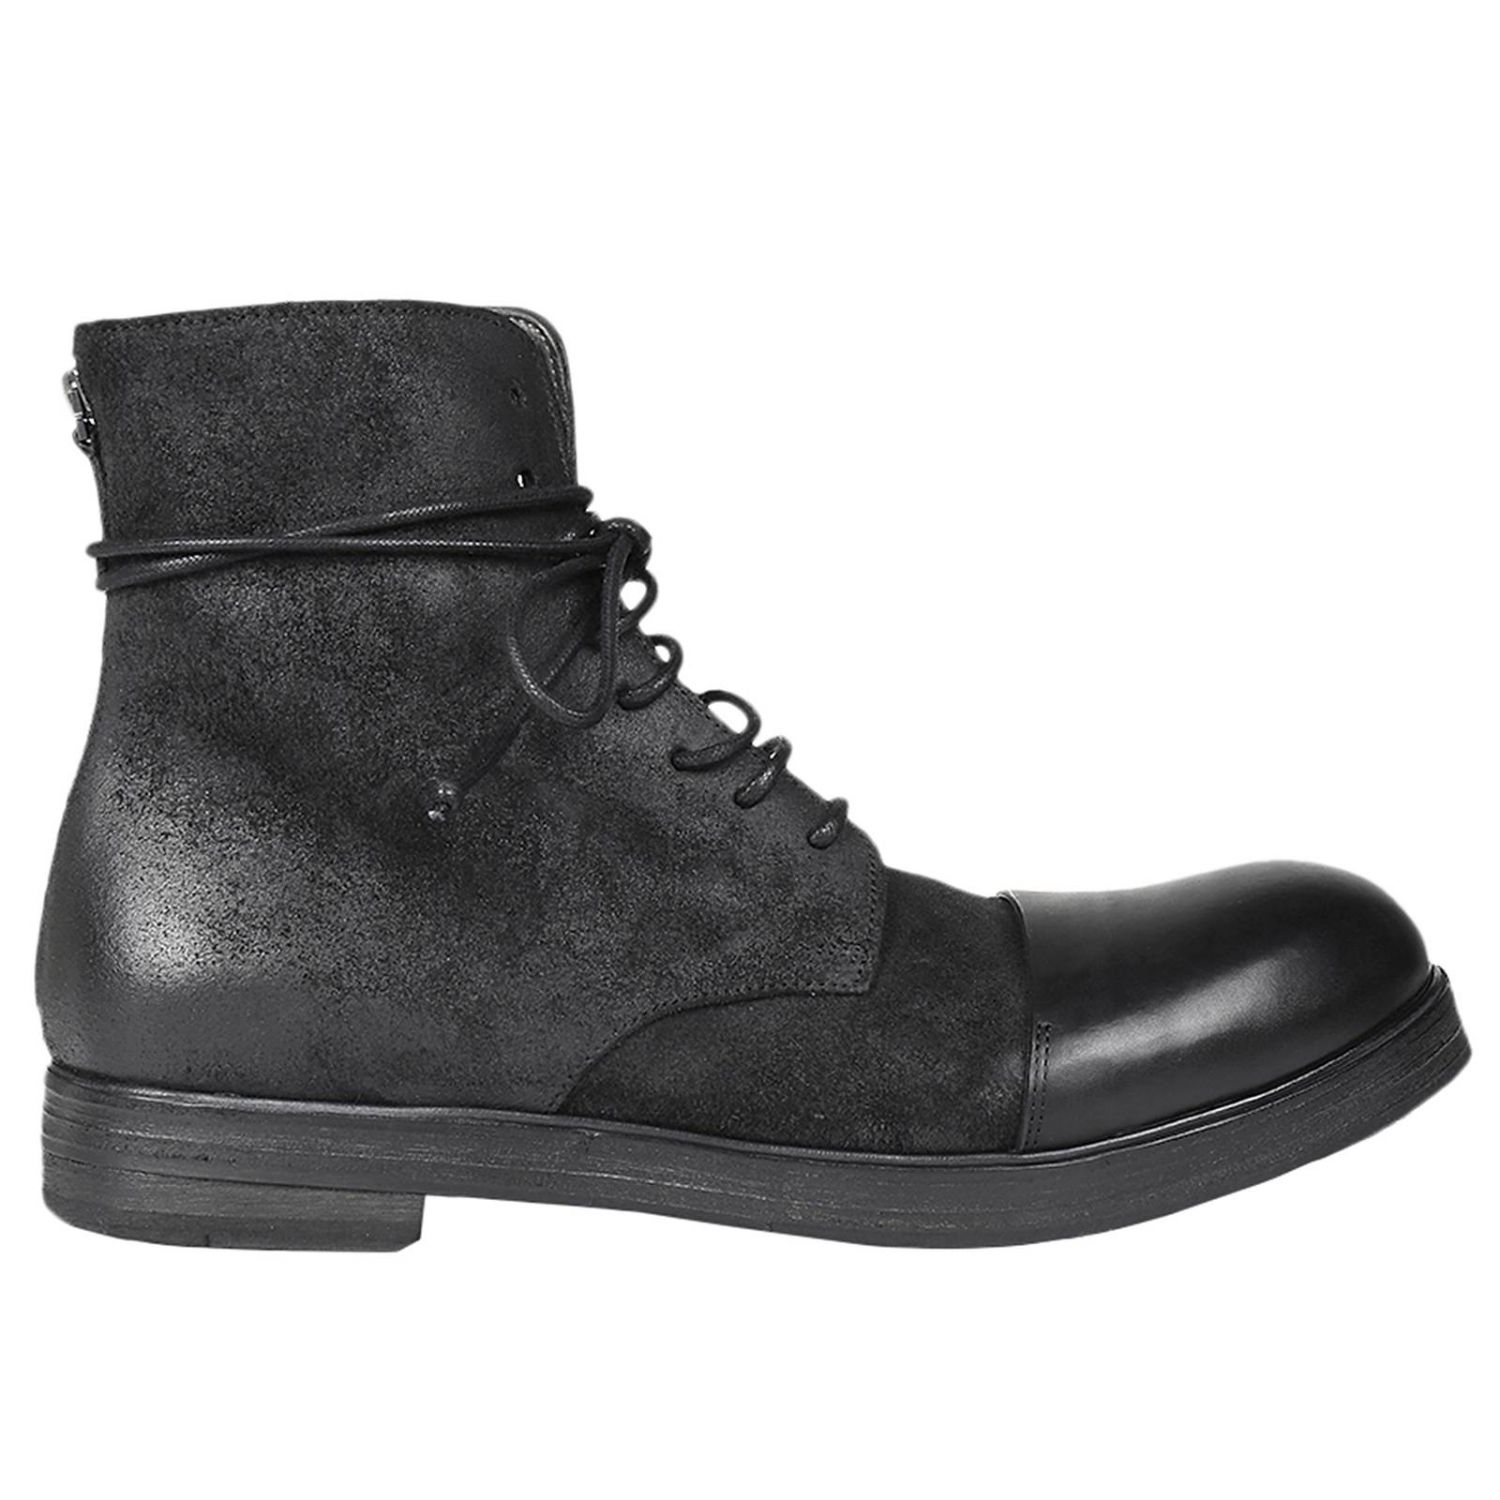 Marsell Outlet: Boots men | Boots Marsell Men Black | Boots Marsell ...